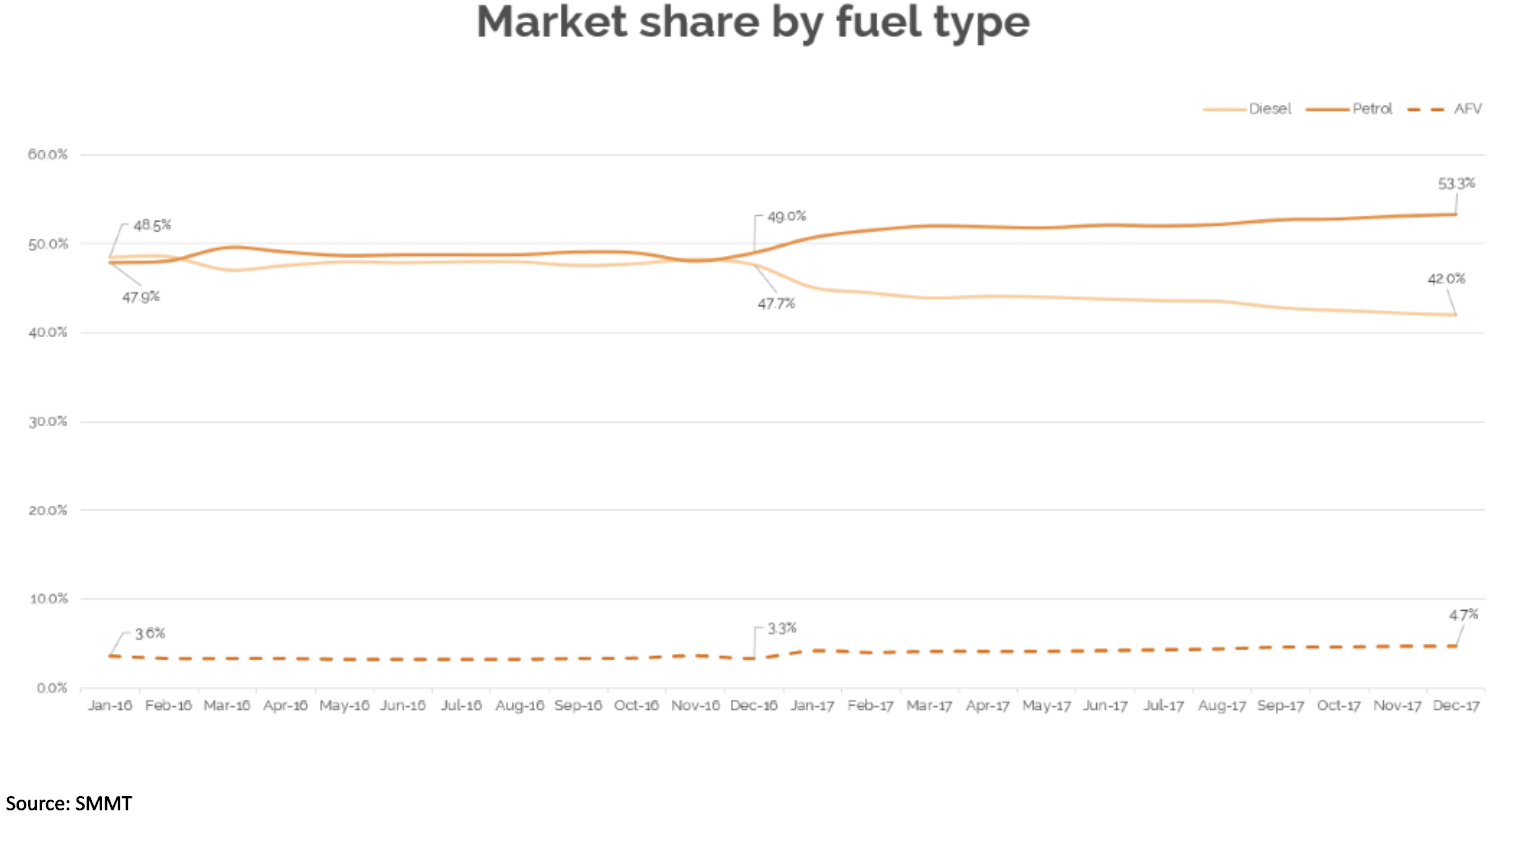 Market share by fuel type